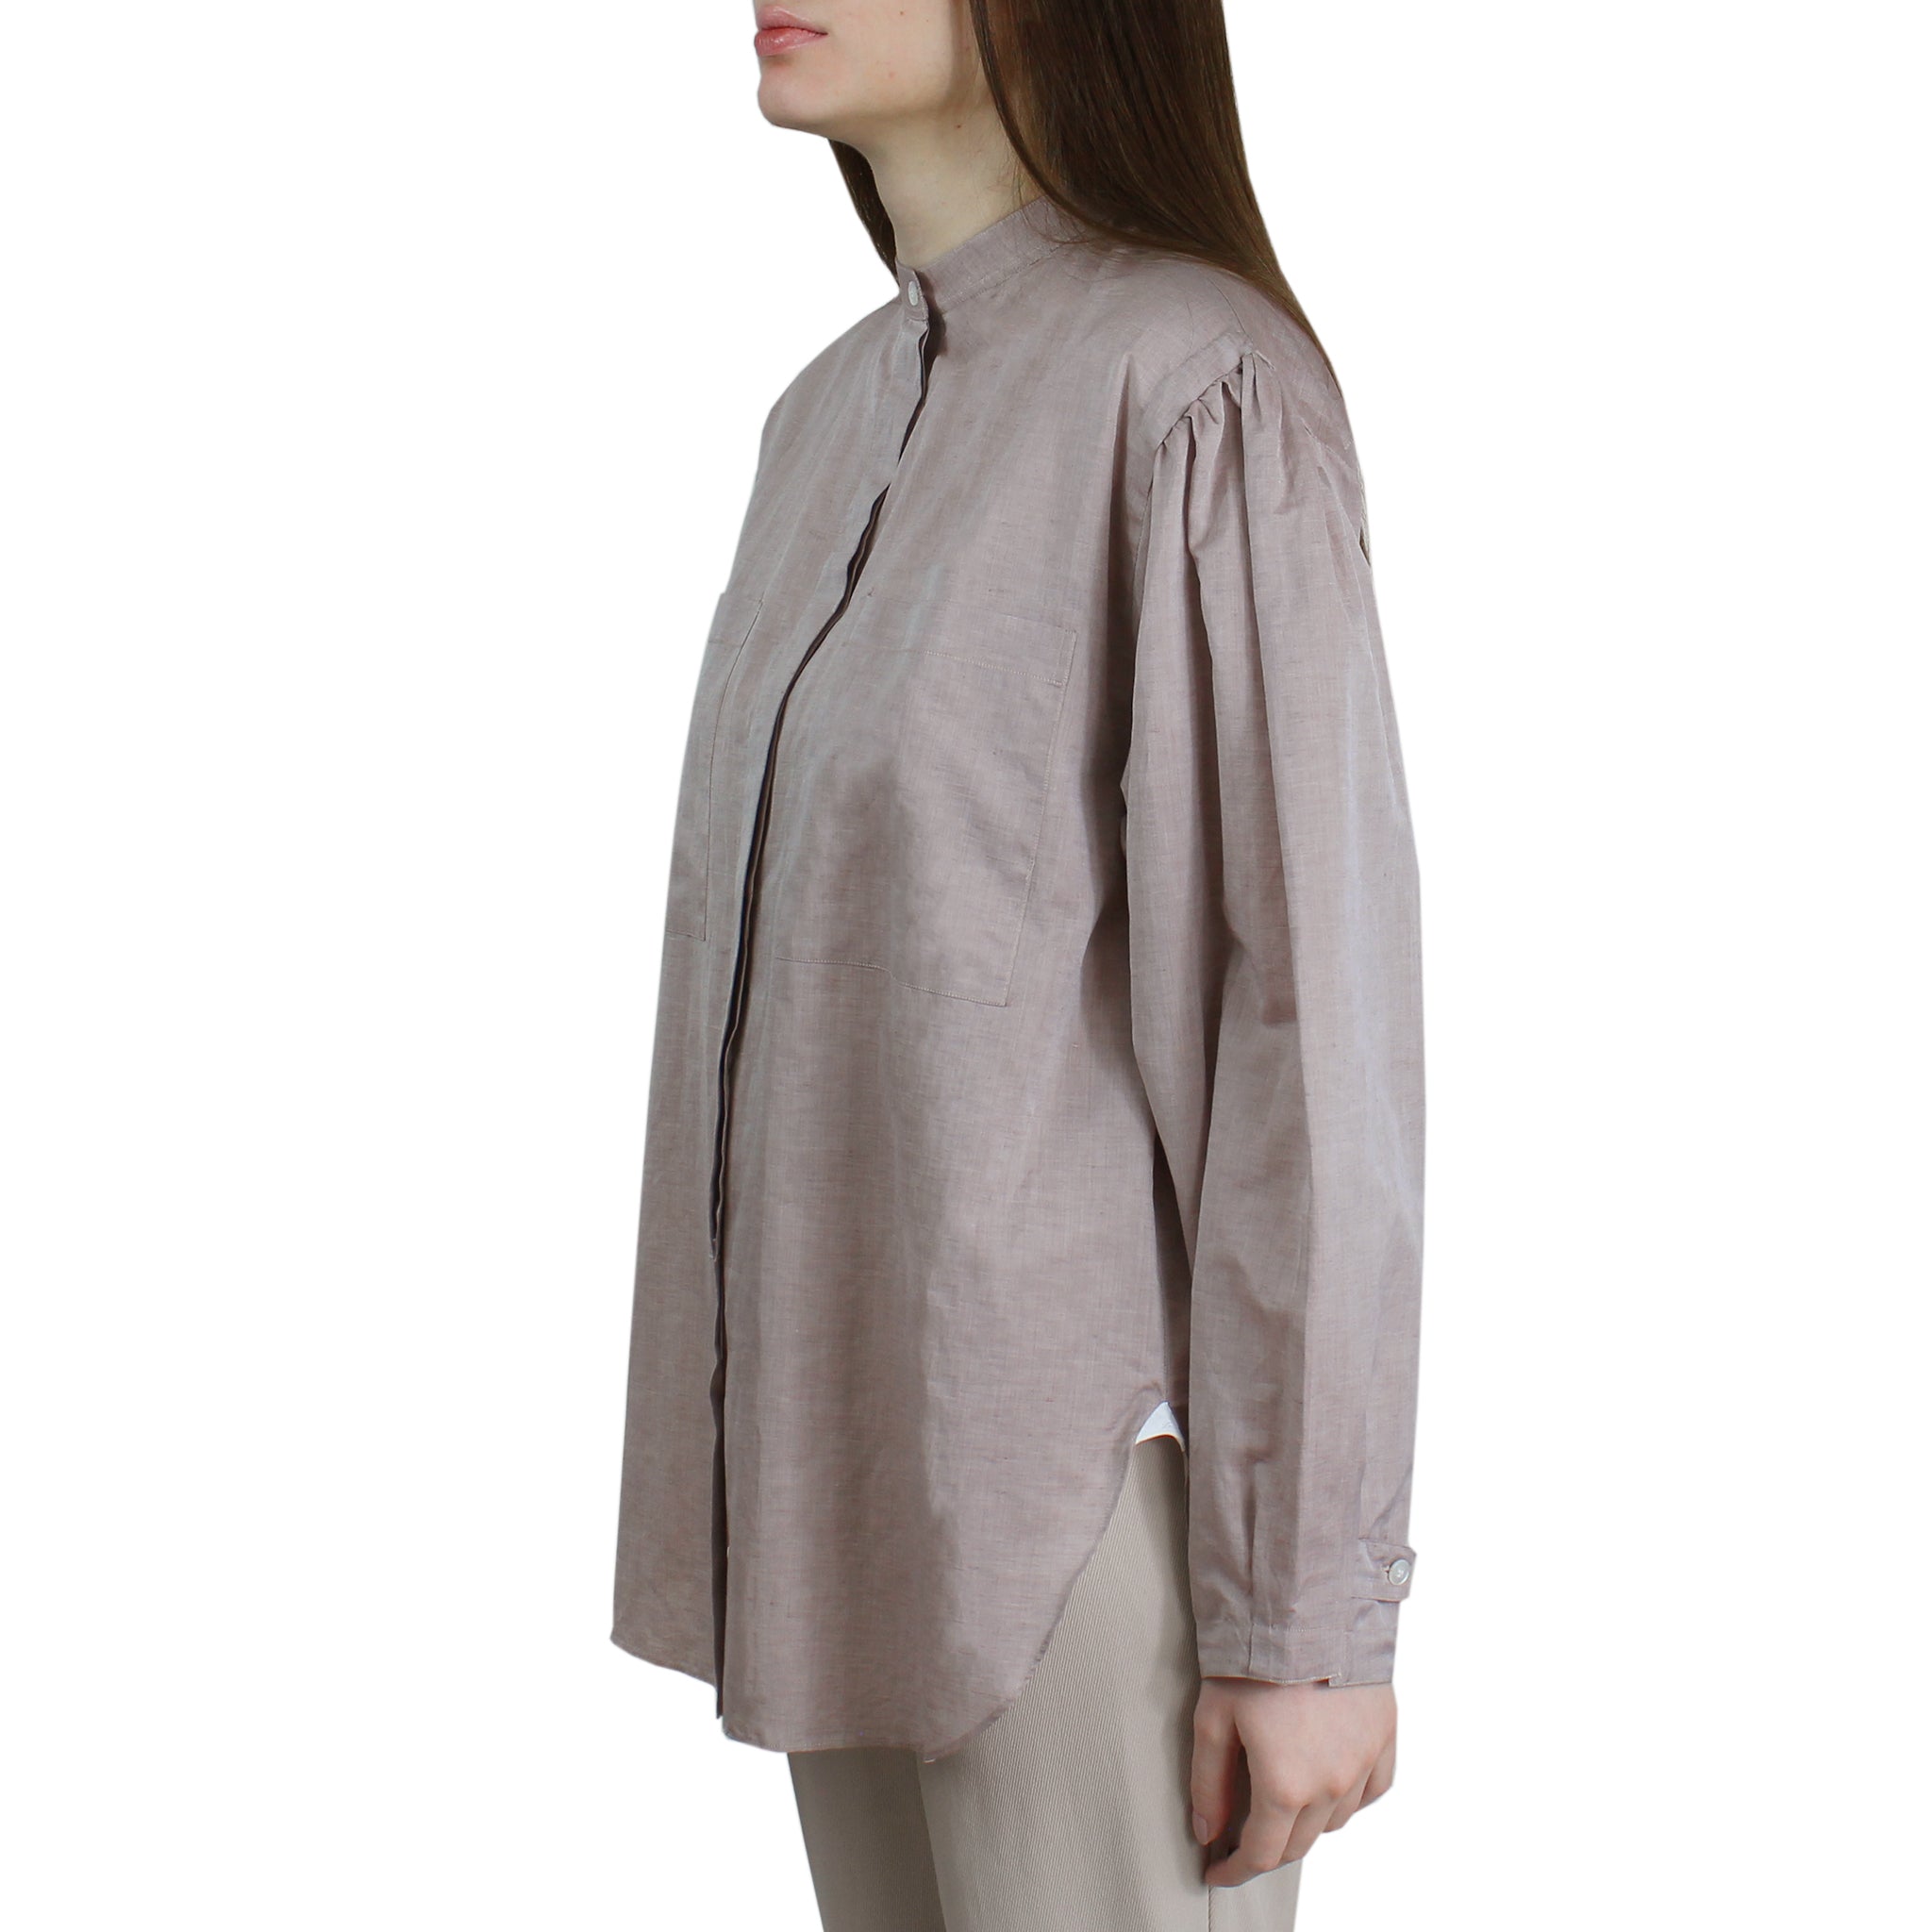 Women's over fit shirt with front pockets and arriccio on the sleeve